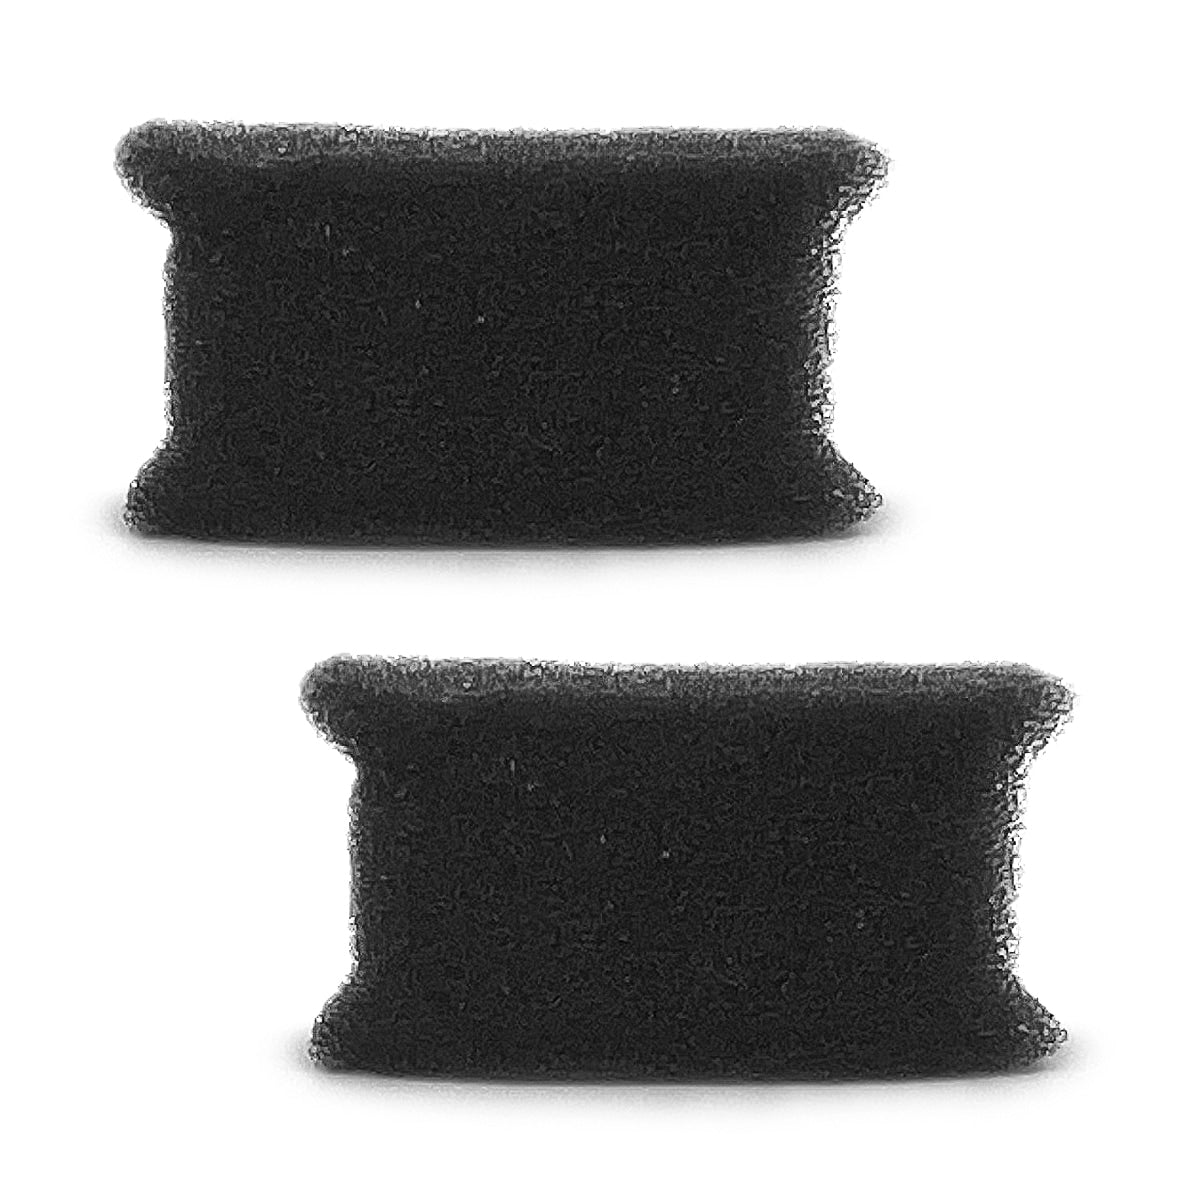 Replacement PureFresh Foam Filter for Transcend Micro CPAP Machines (2 Pack)